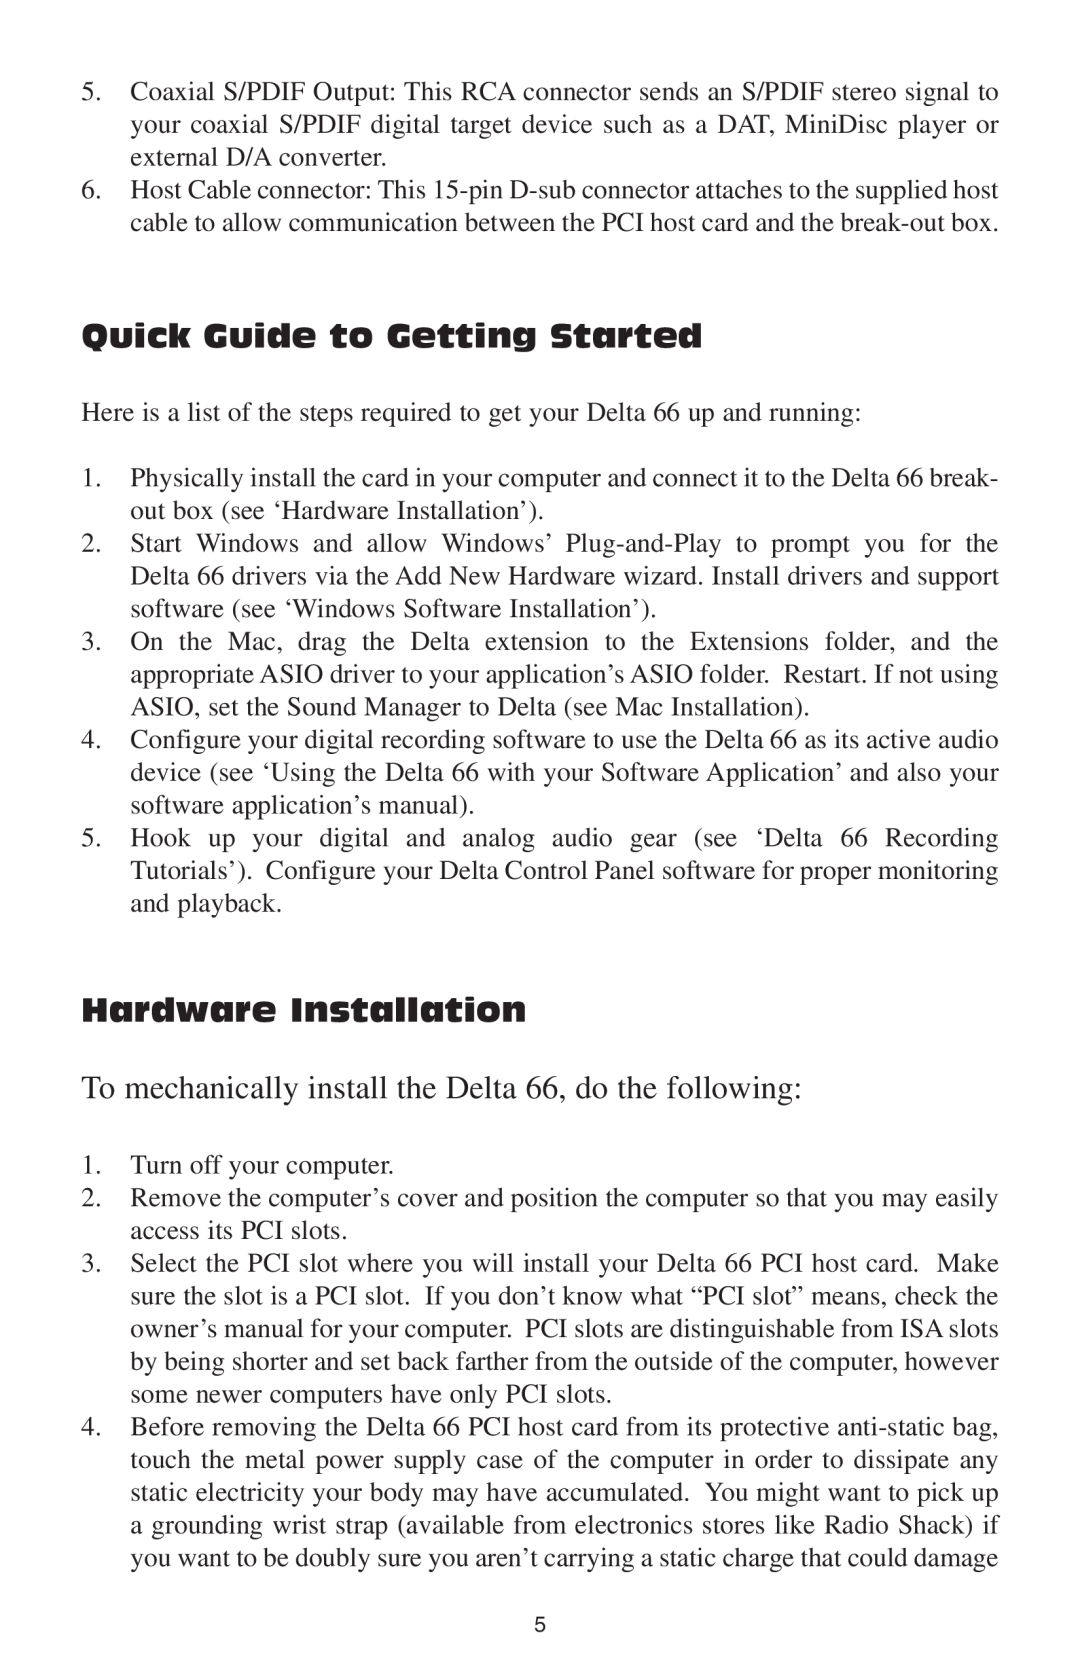 M-Audio 66 manual Quick Guide to Getting Started, Hardware Installation 